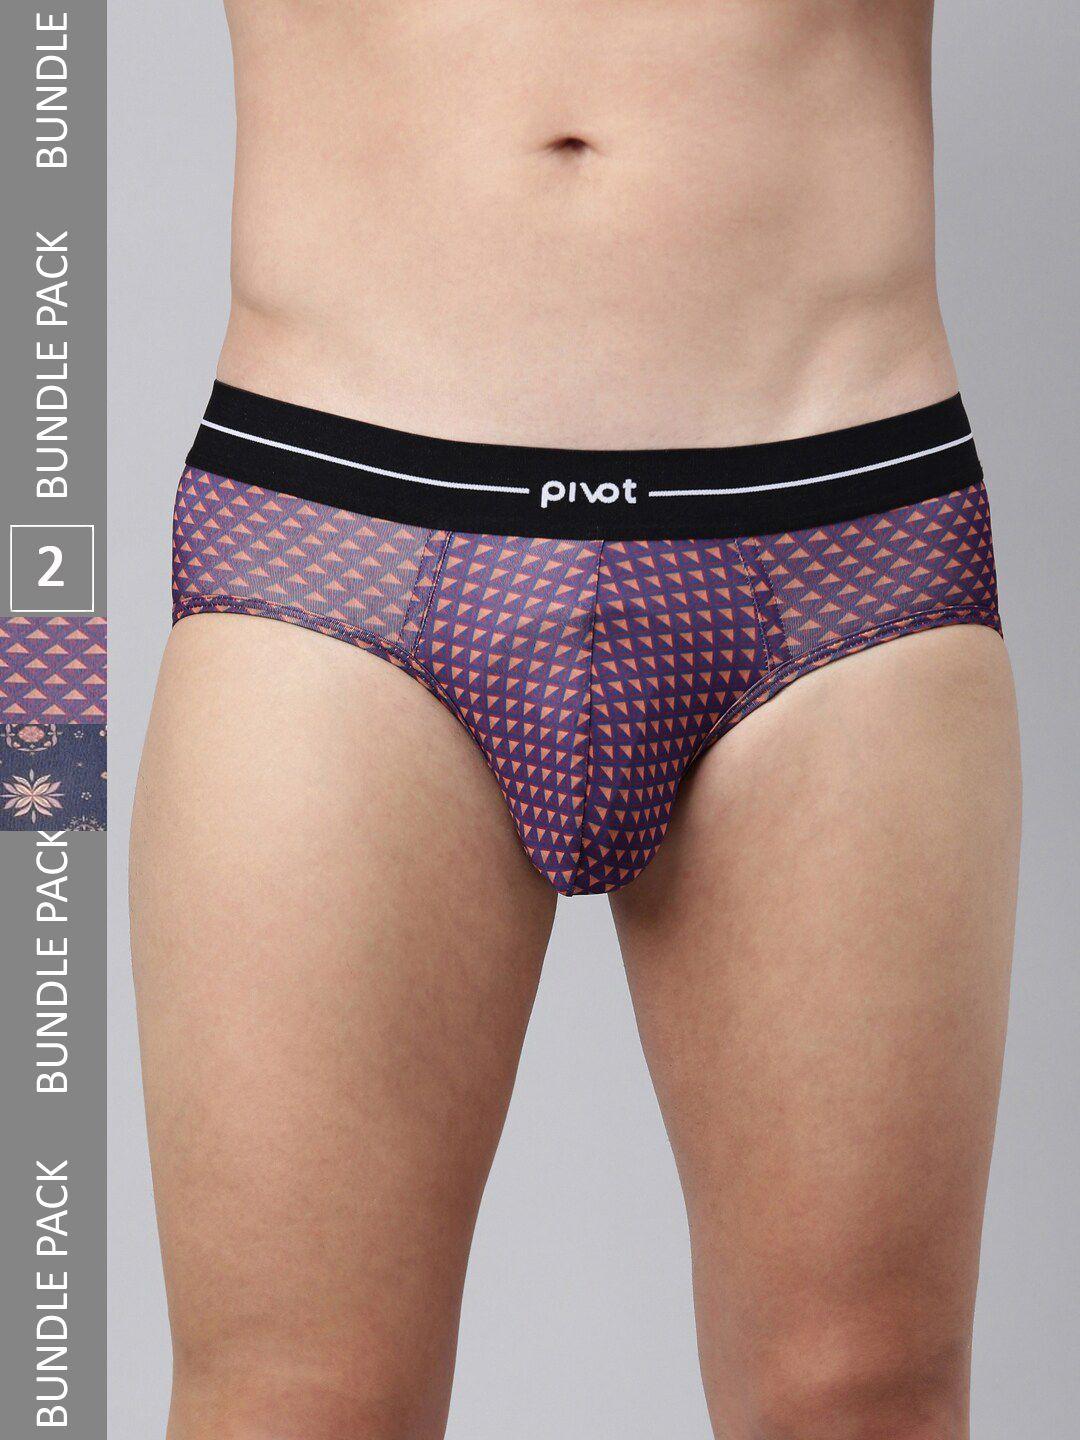 pivot-men-pack-of-2-mid-rise-assorted-basic-briefs